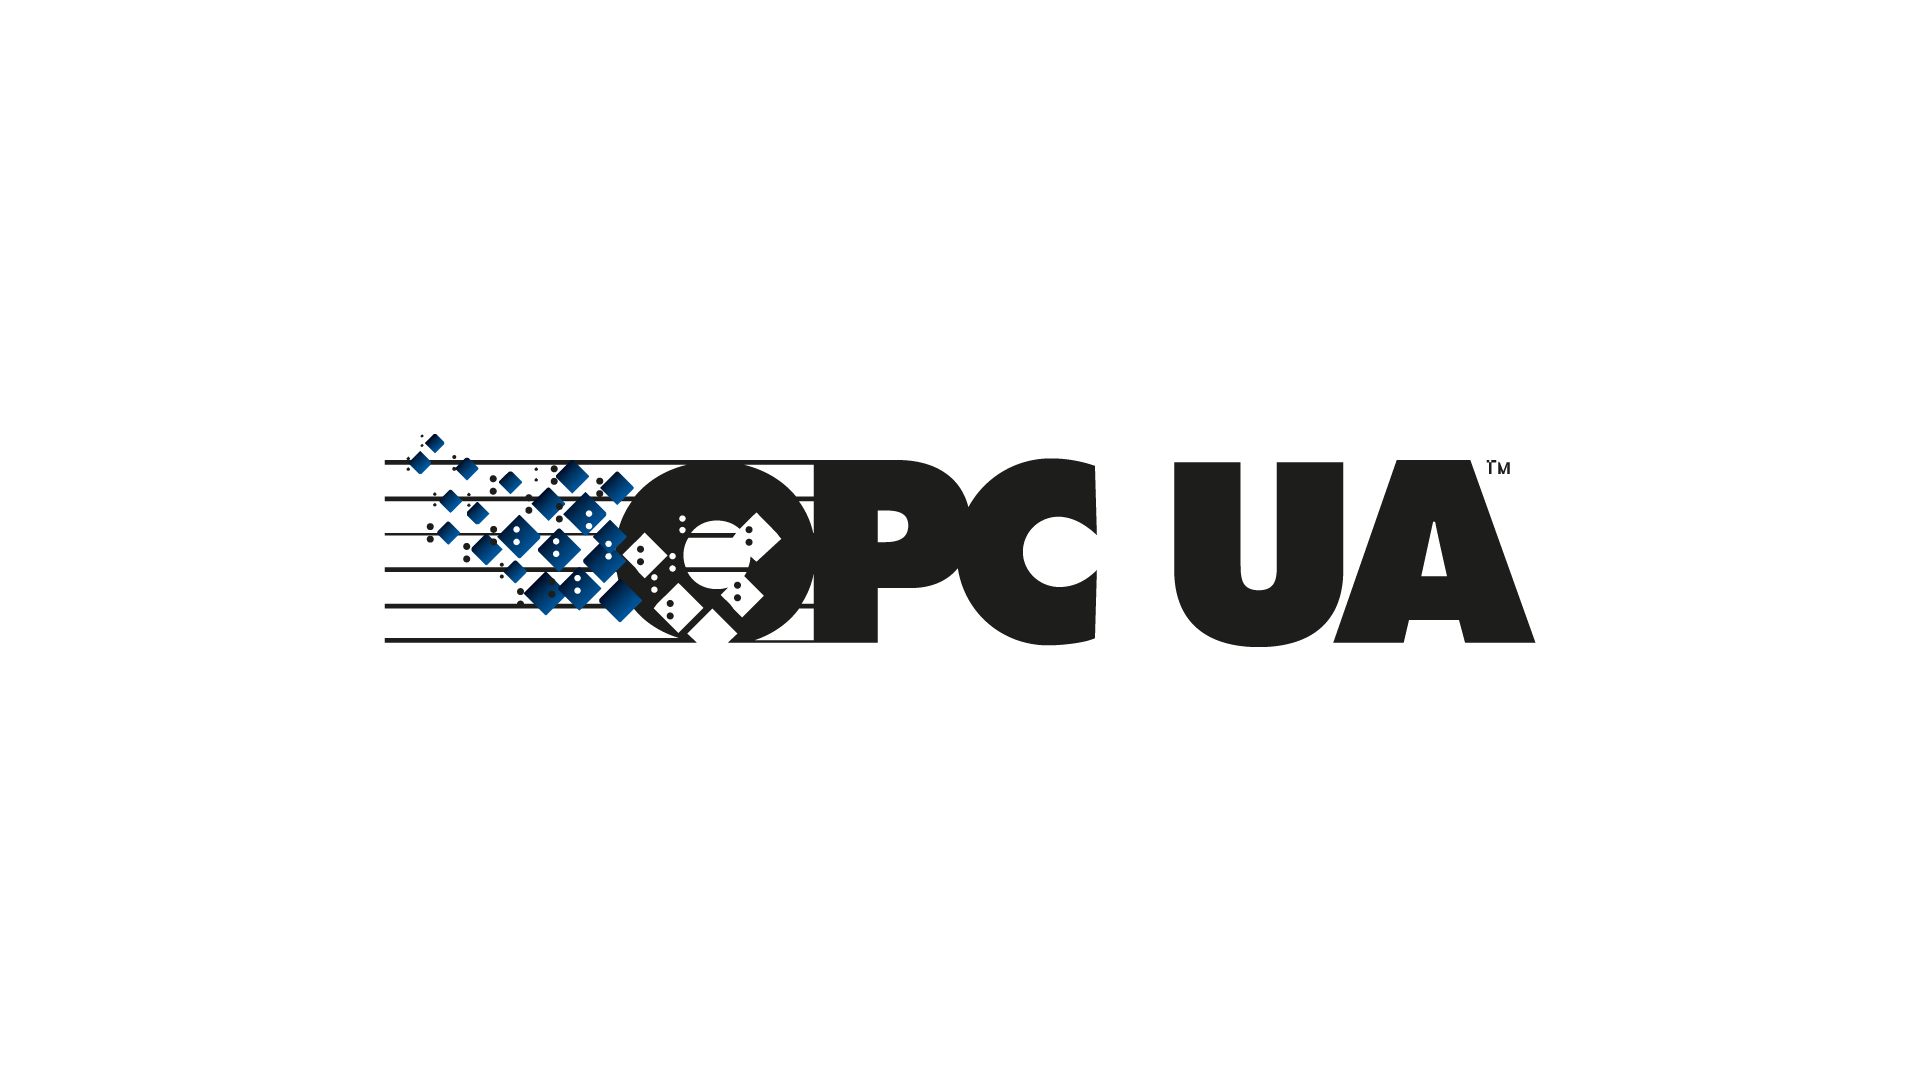 Logo OPC UA in black and blue.